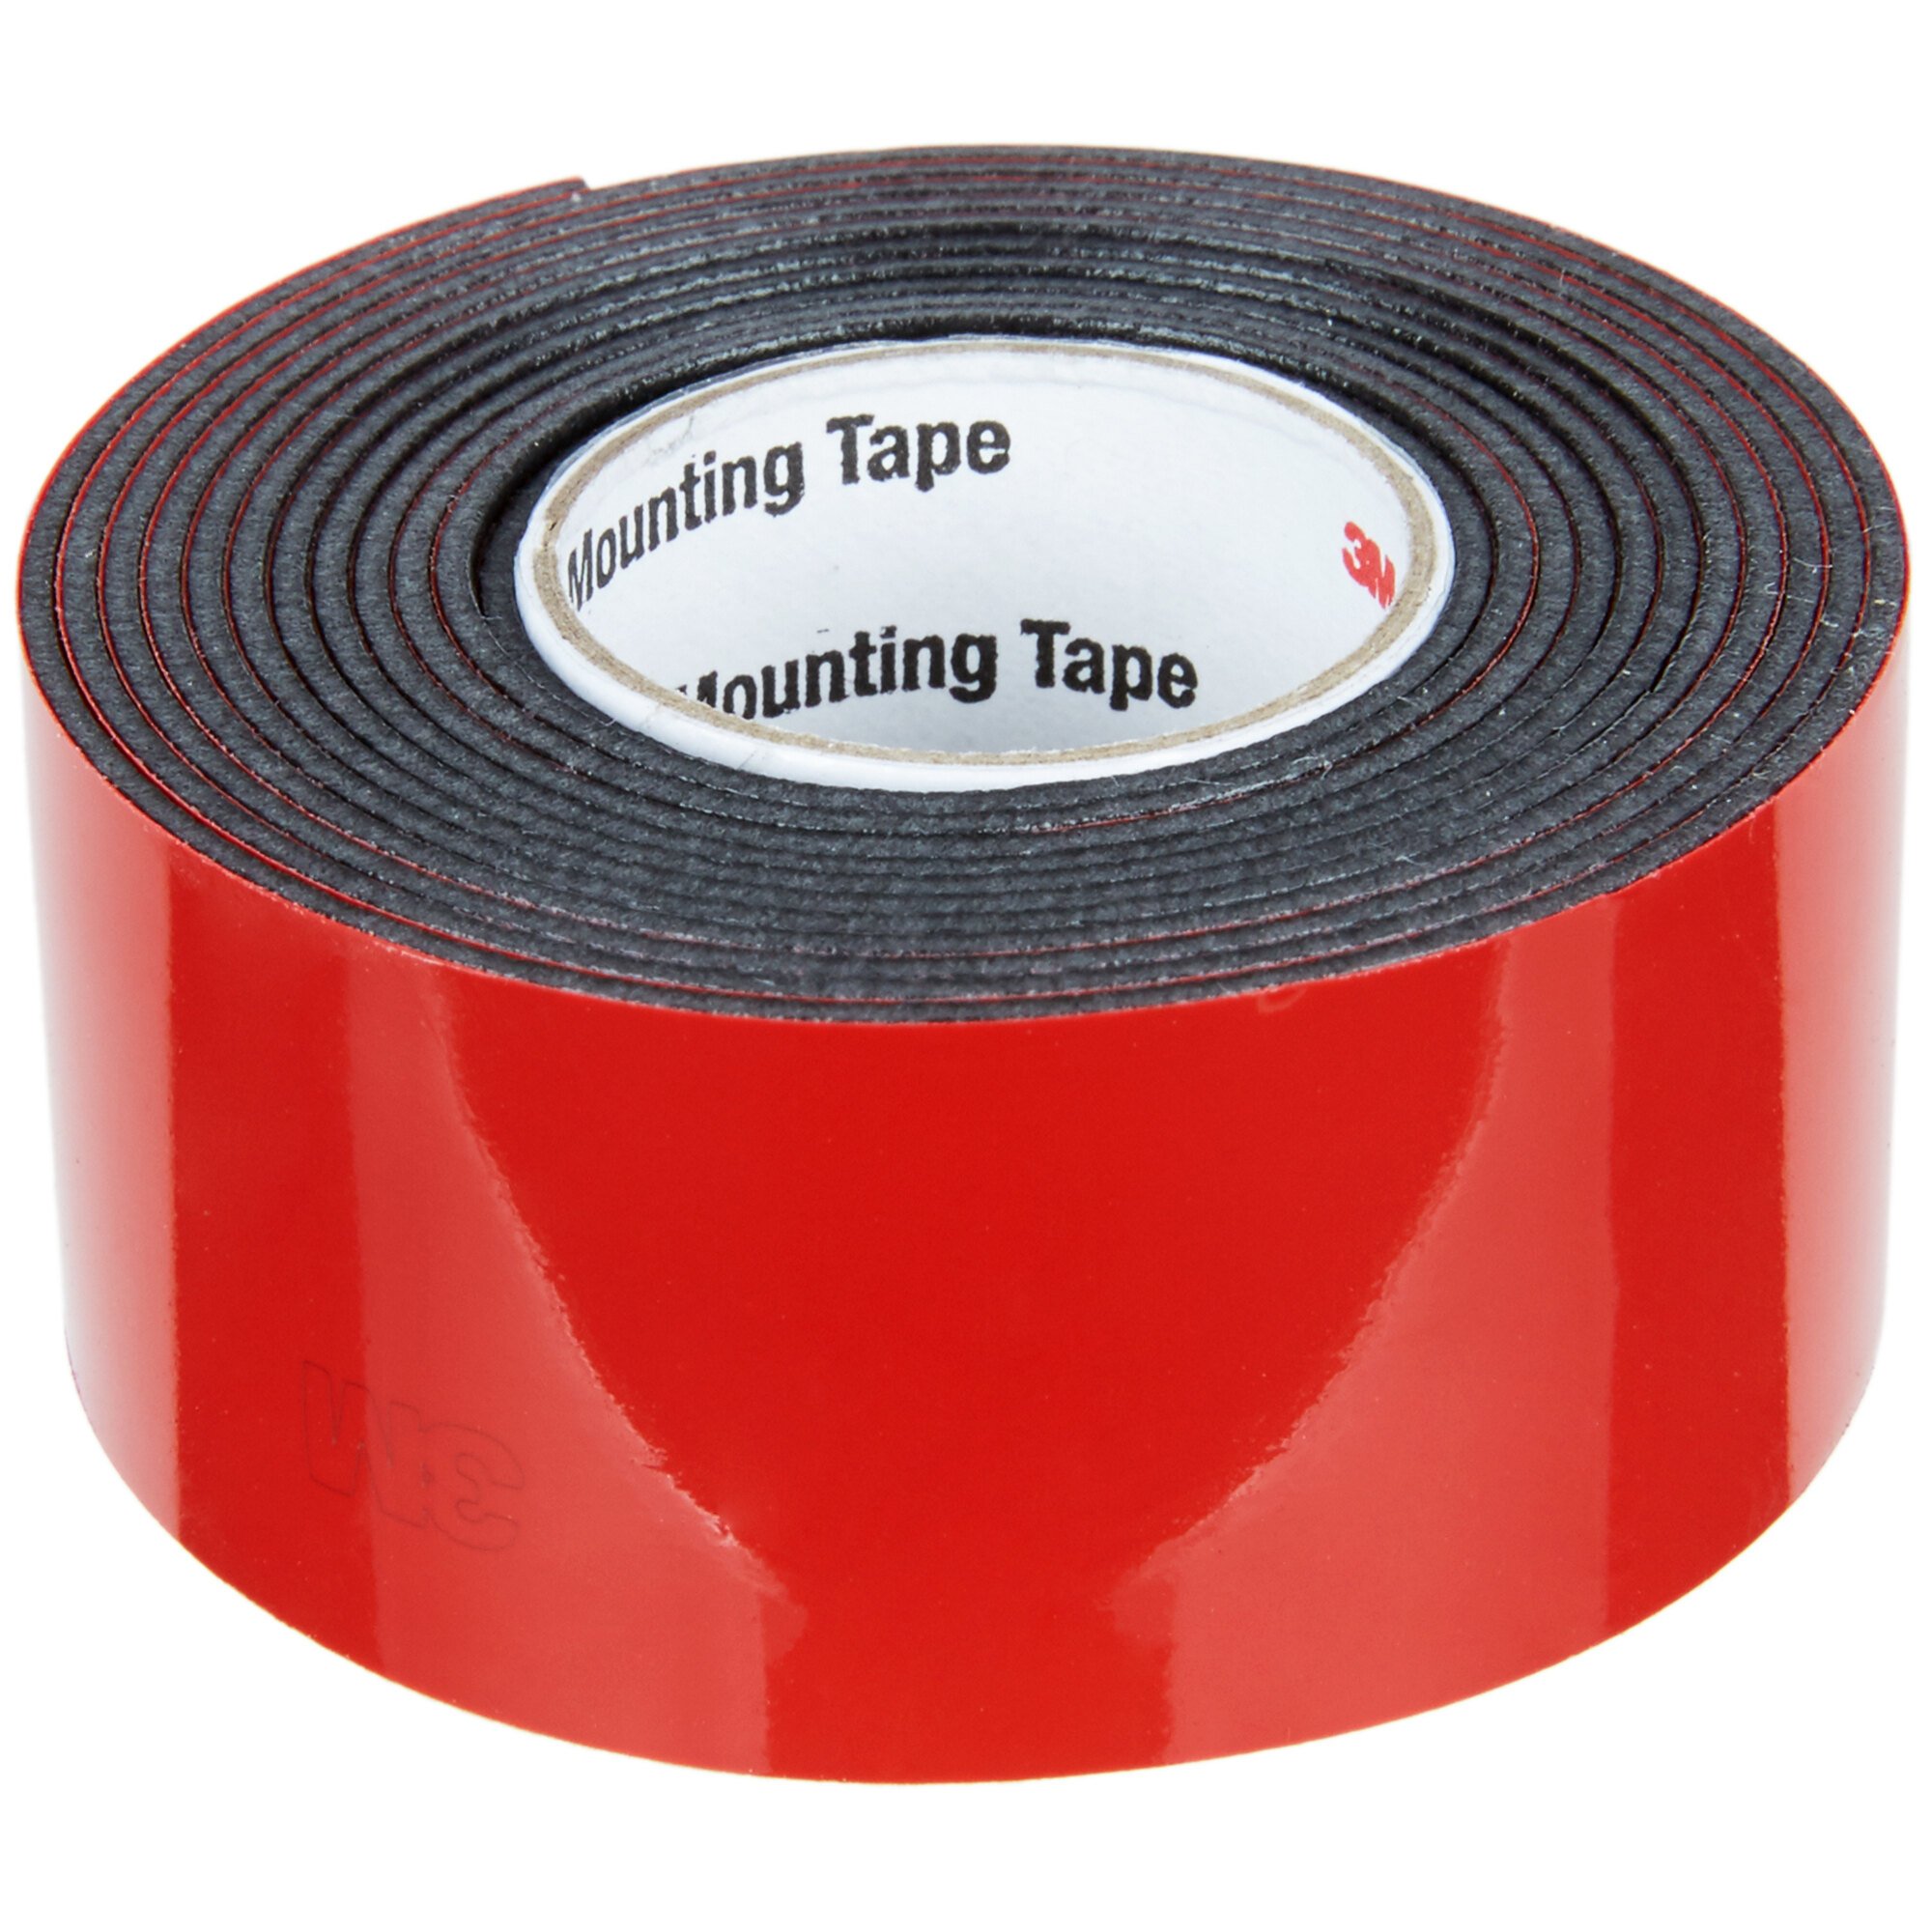 exterior mounting tape